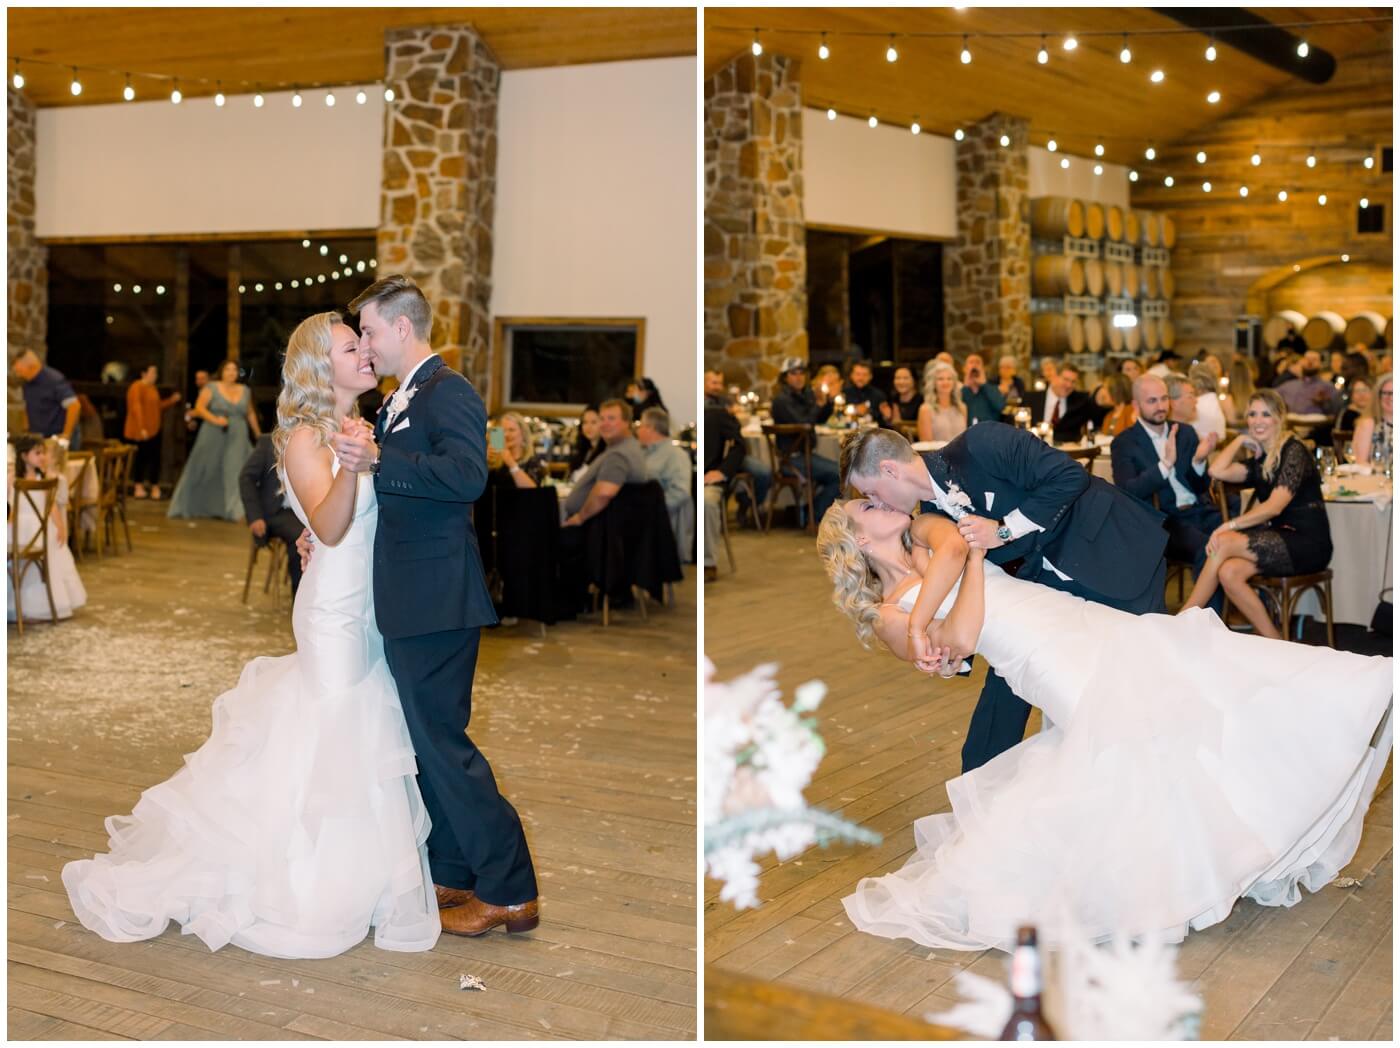 Houston Wedding at The Vine | the bride and groom smile during their first dance 